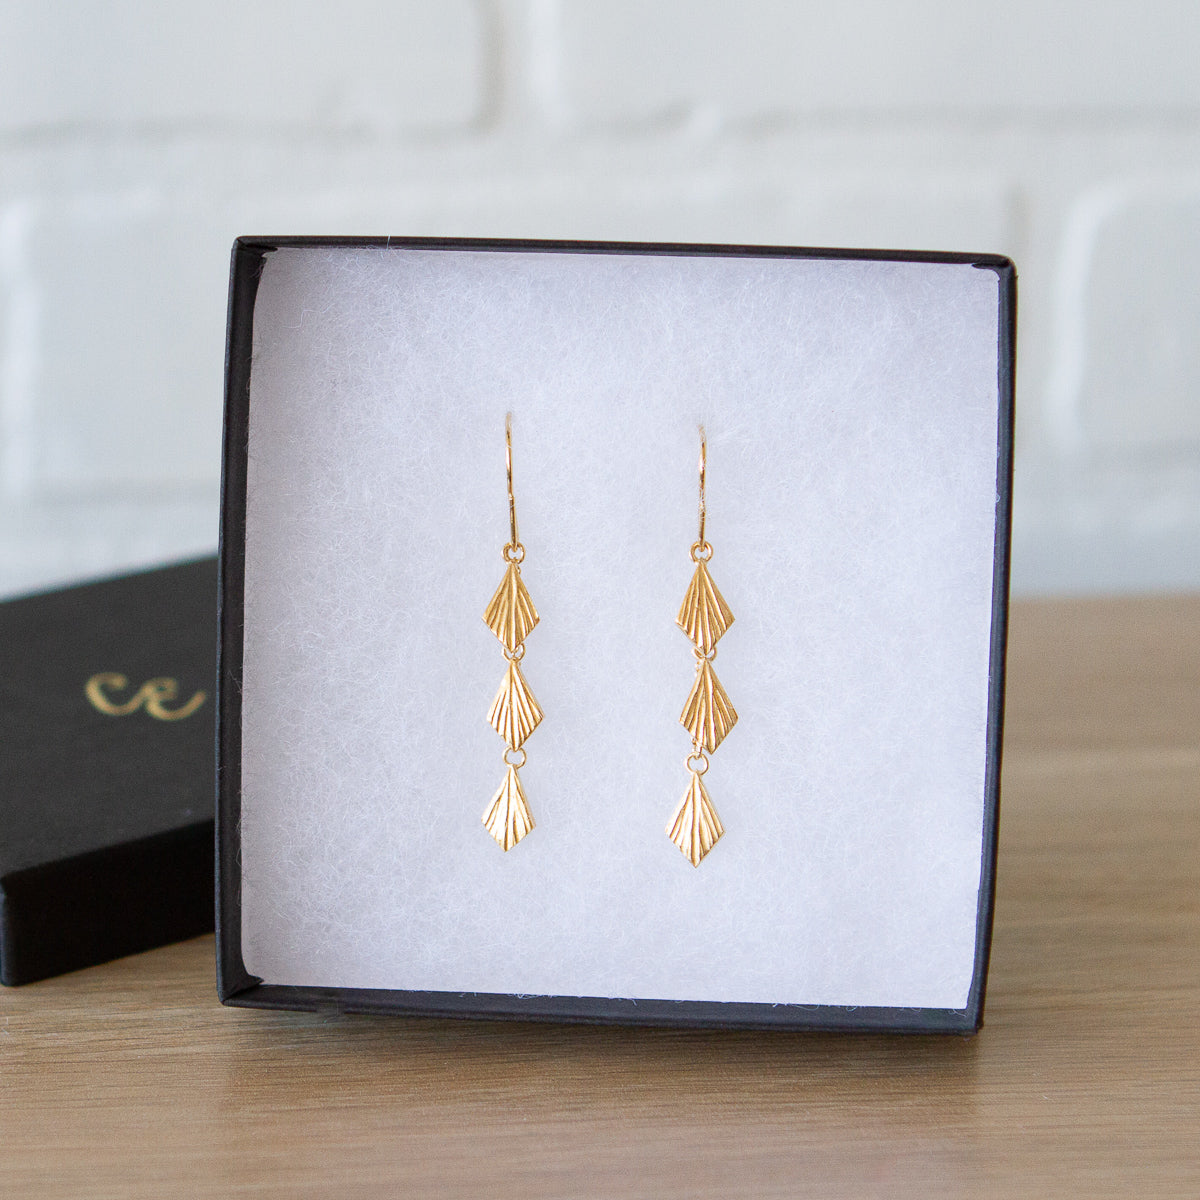 Three overlapping cascading tiers of fan-shaped flame dangles in gold vermeil hanging from an earwire in a gift box